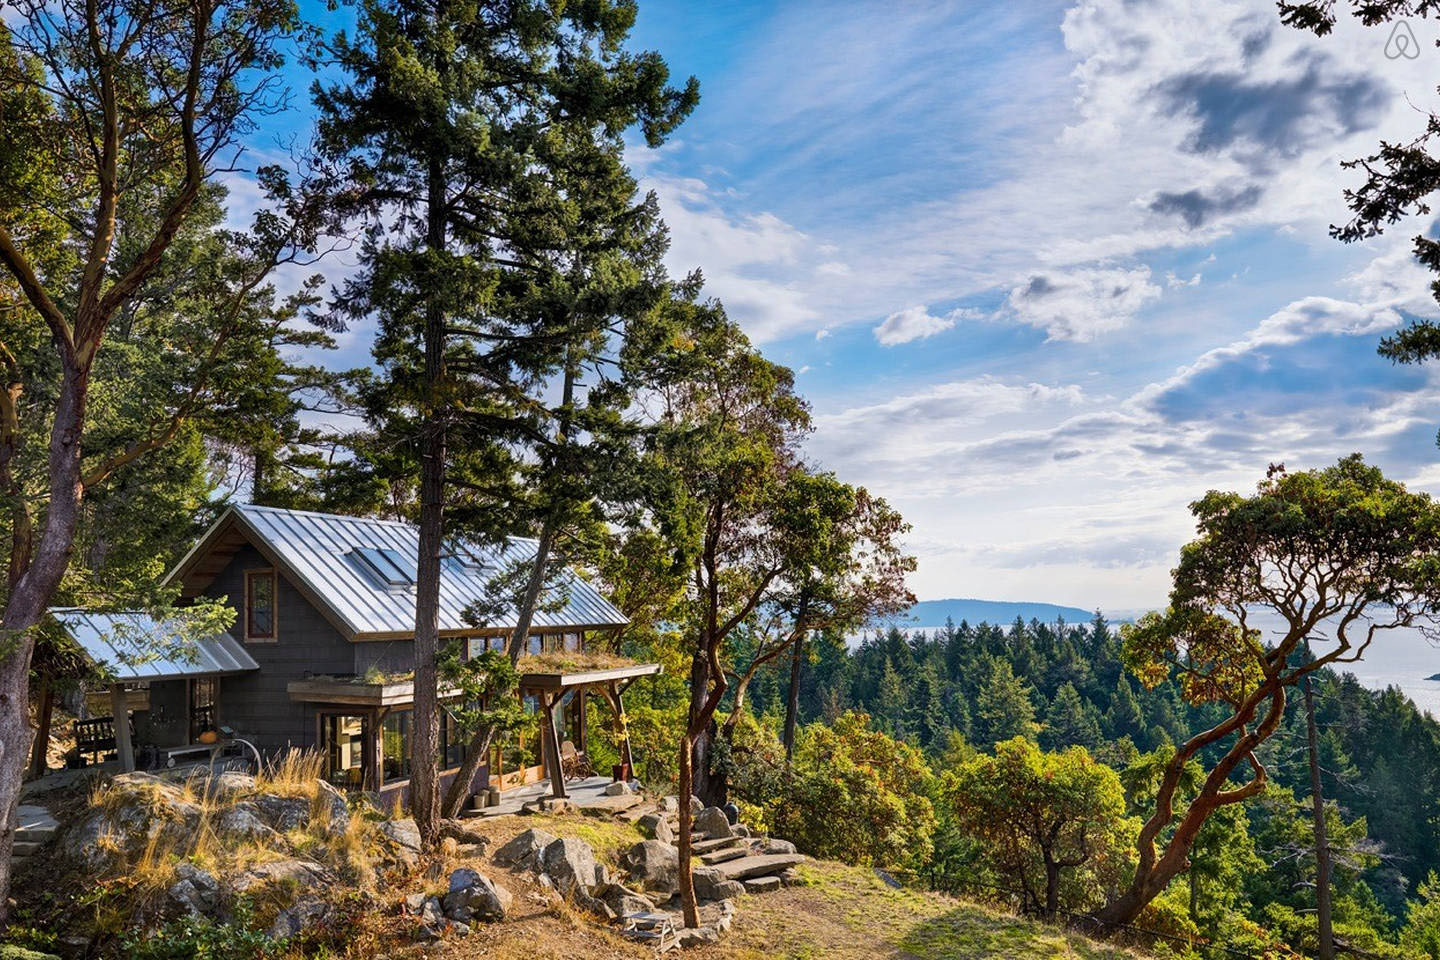 Pender Island Country Cabin